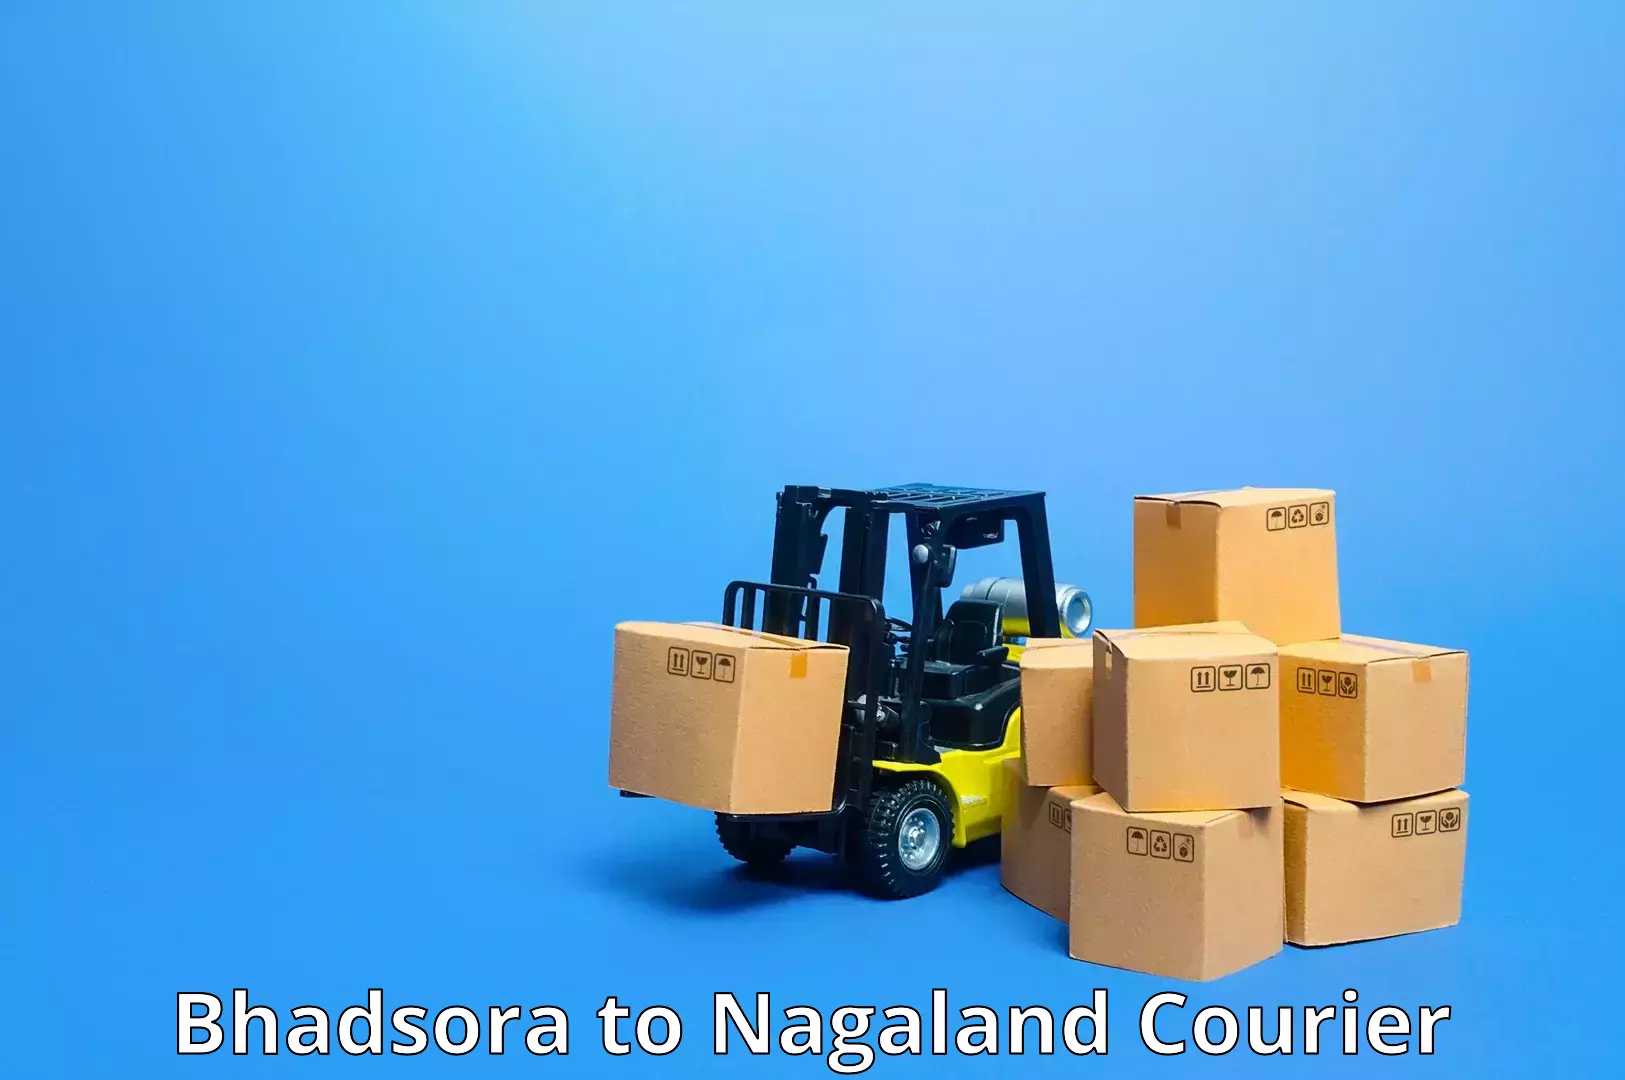 Express courier capabilities in Bhadsora to Dimapur